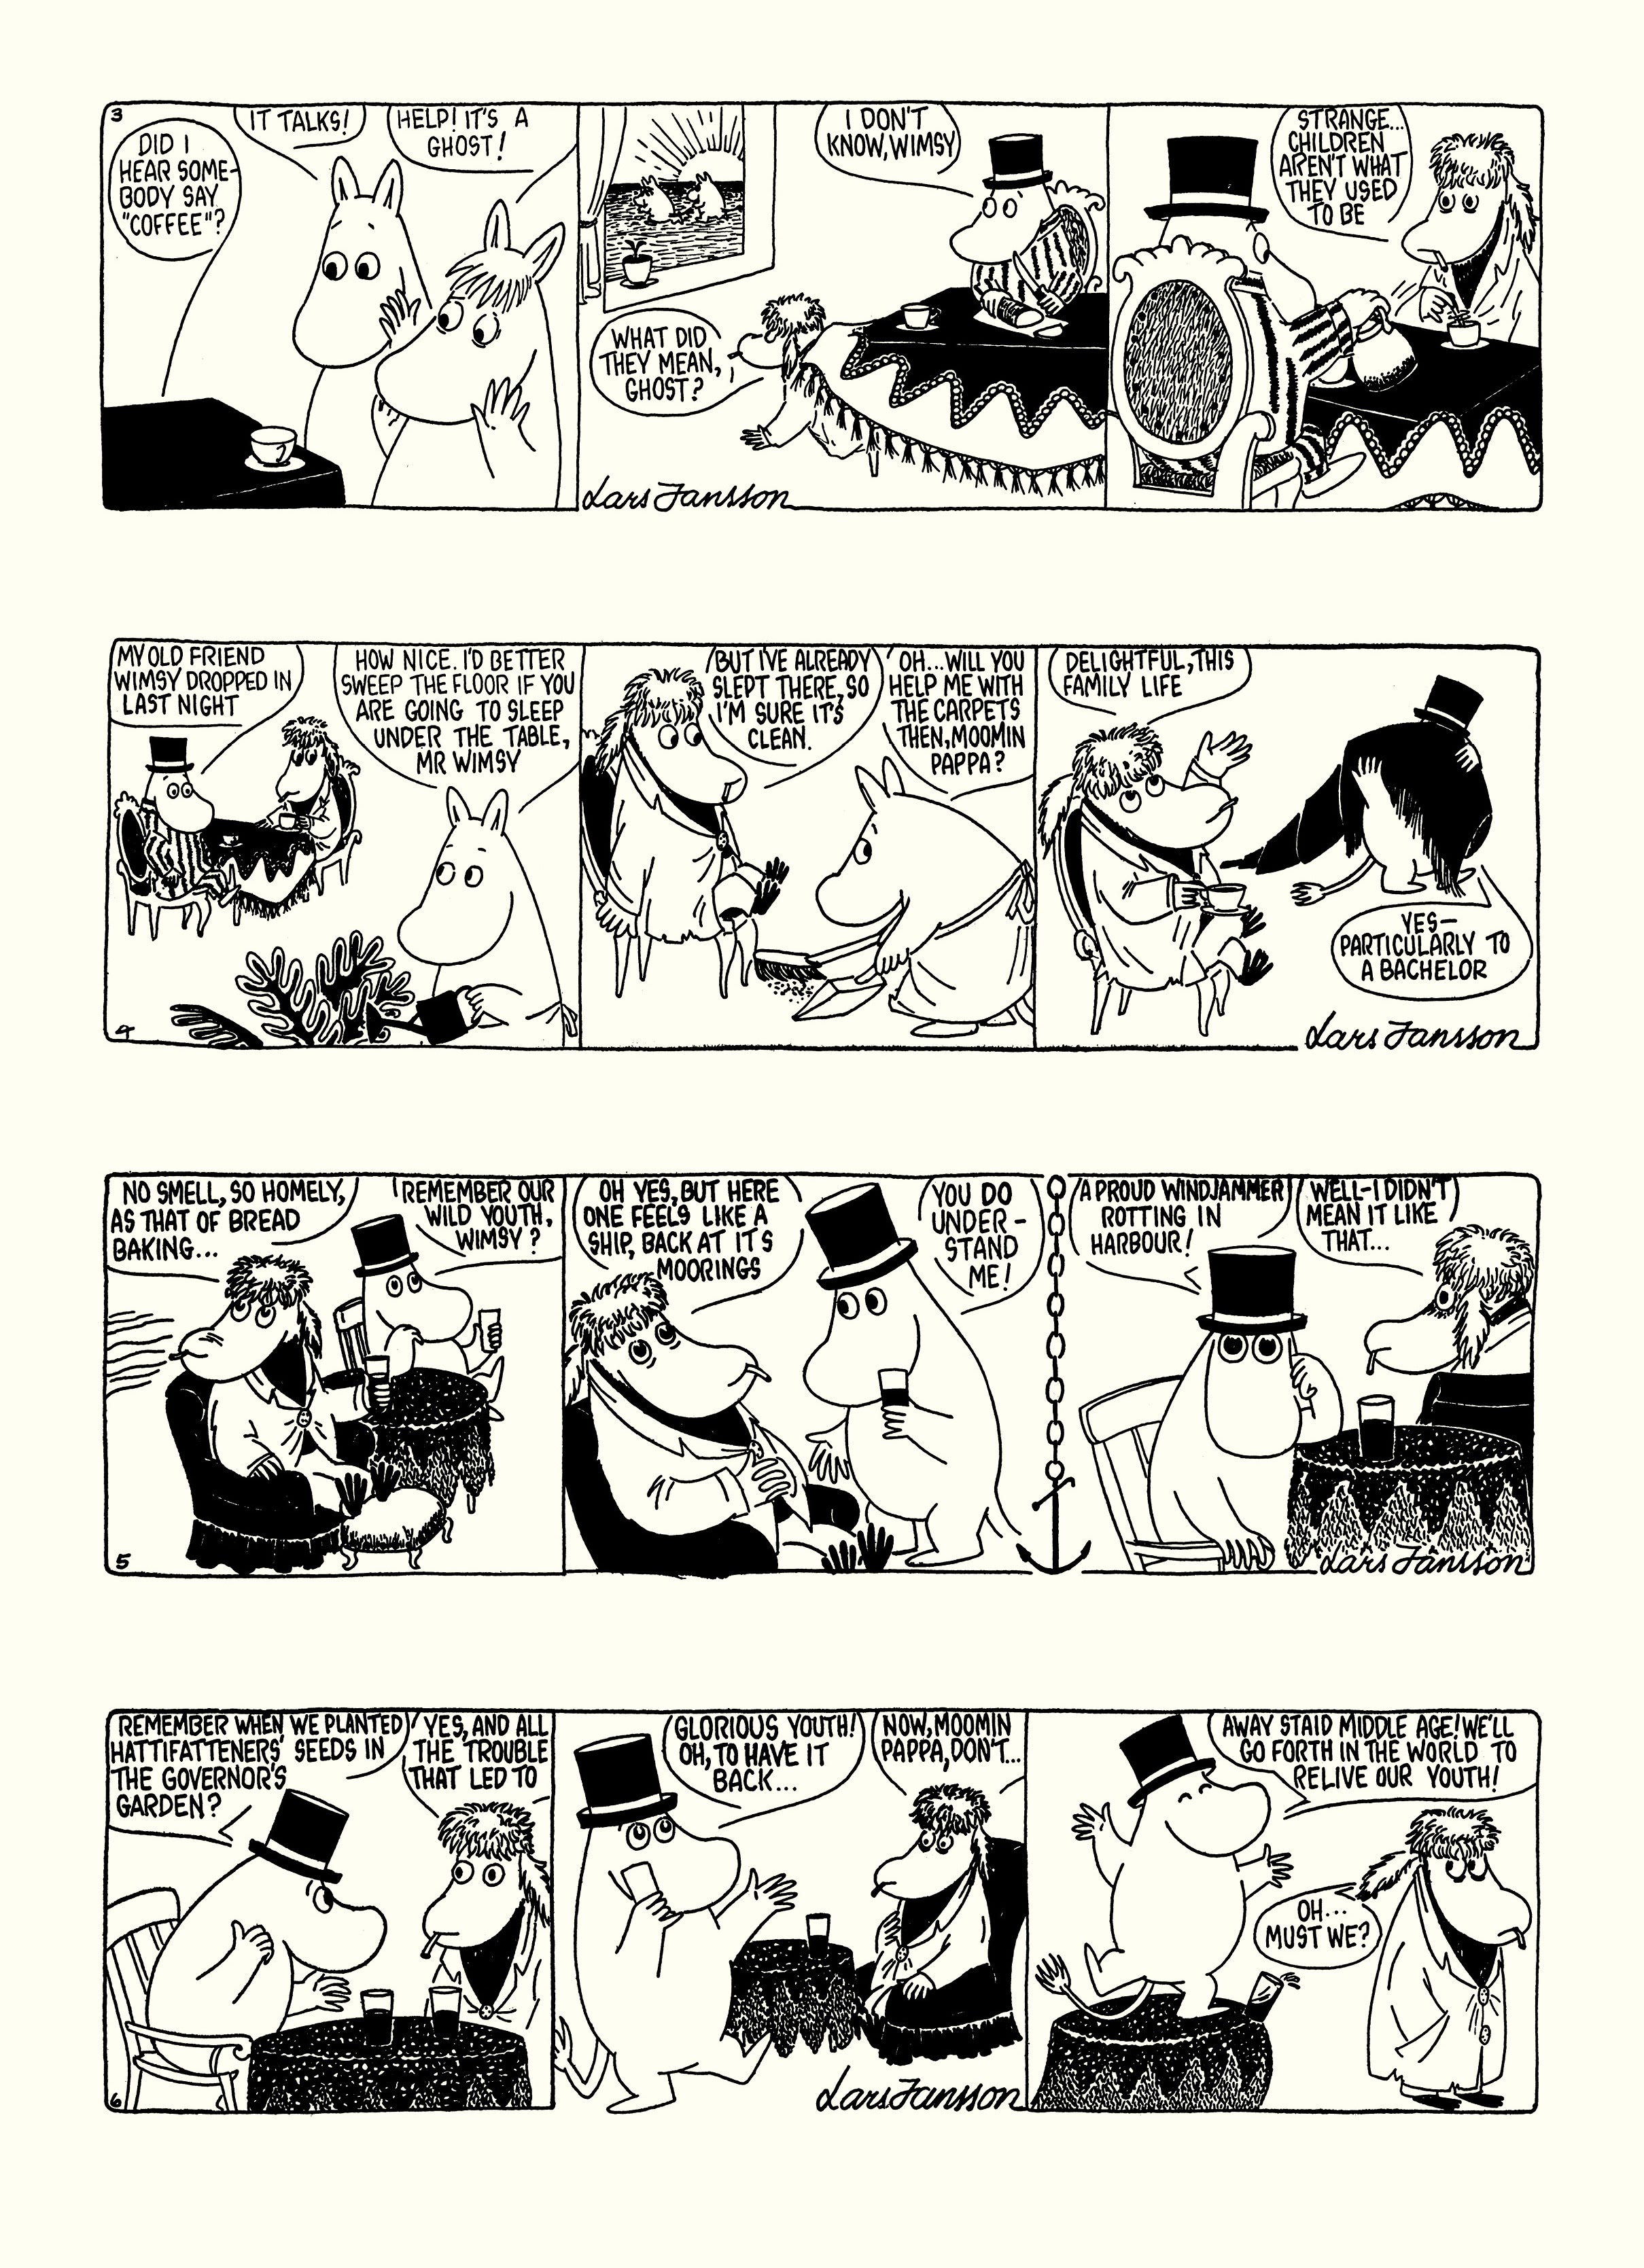 Read online Moomin: The Complete Lars Jansson Comic Strip comic -  Issue # TPB 6 - 48